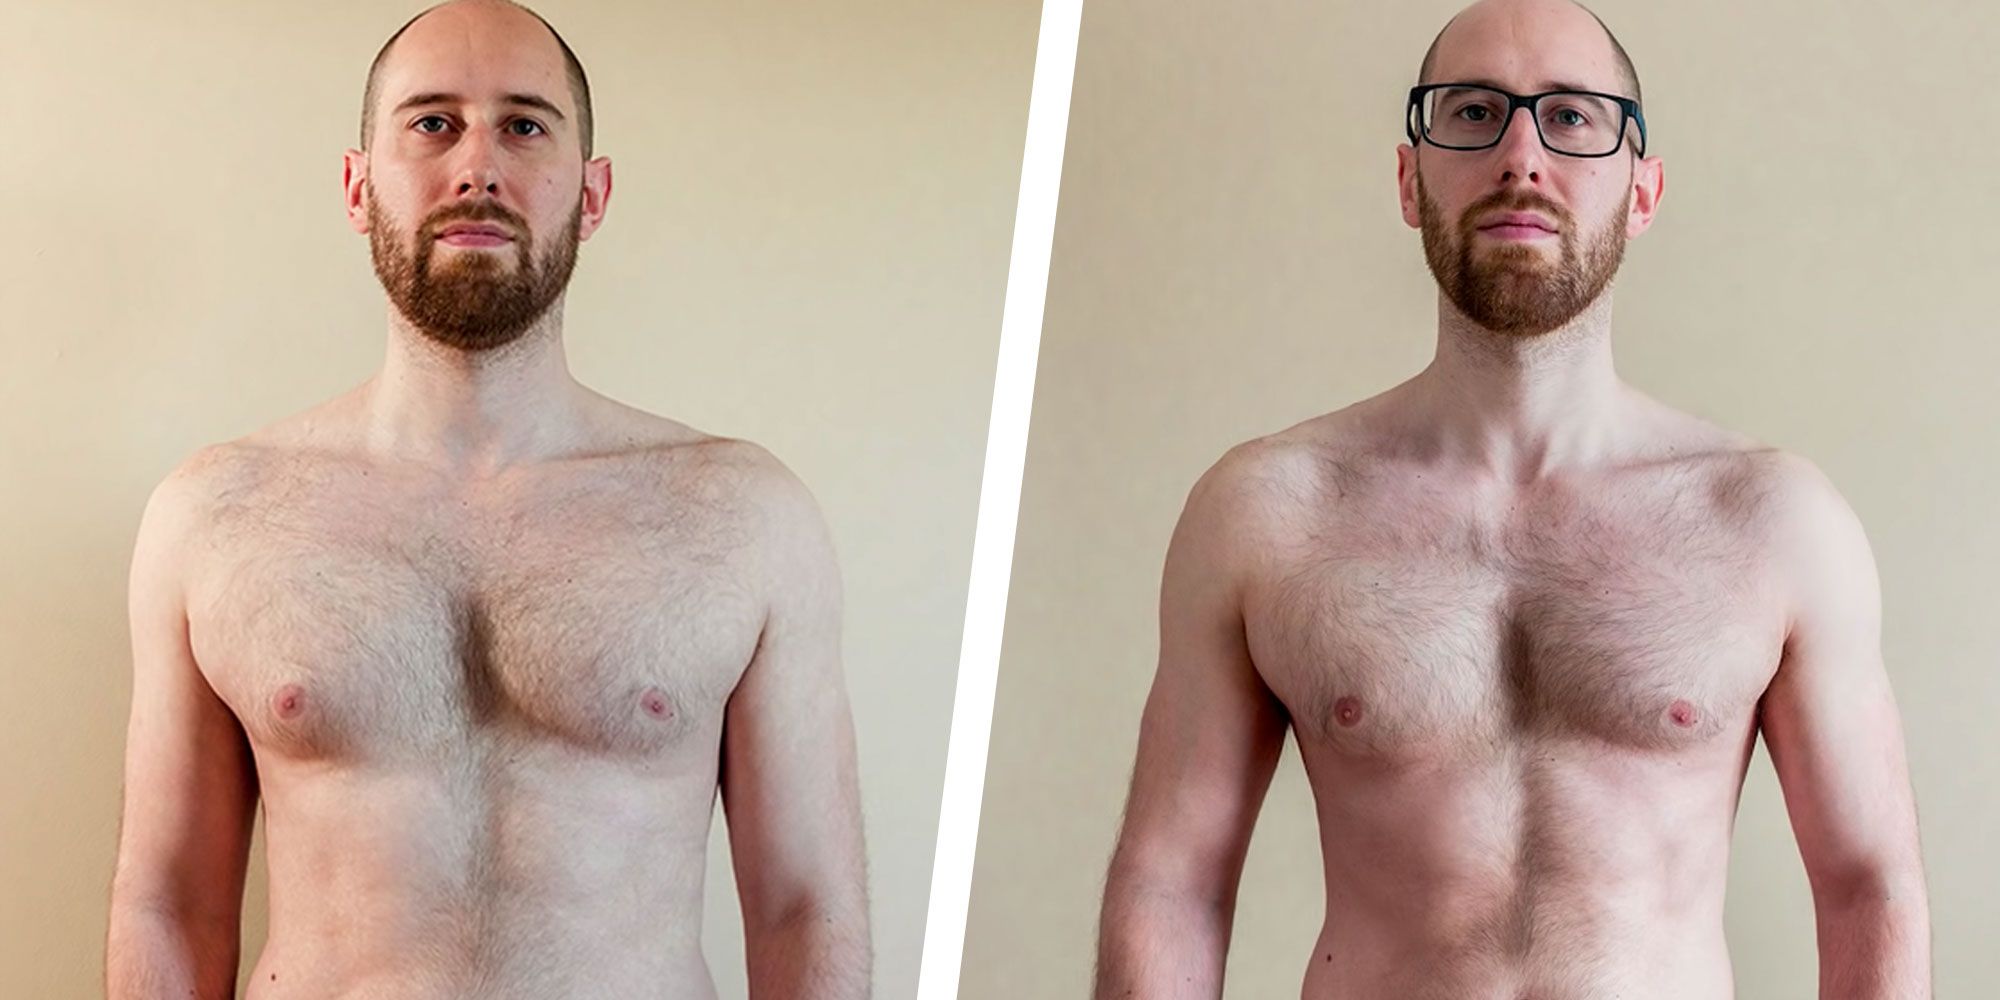 Alternate-Day Fasting Helped This Guy Lose 14 Pounds In One Month